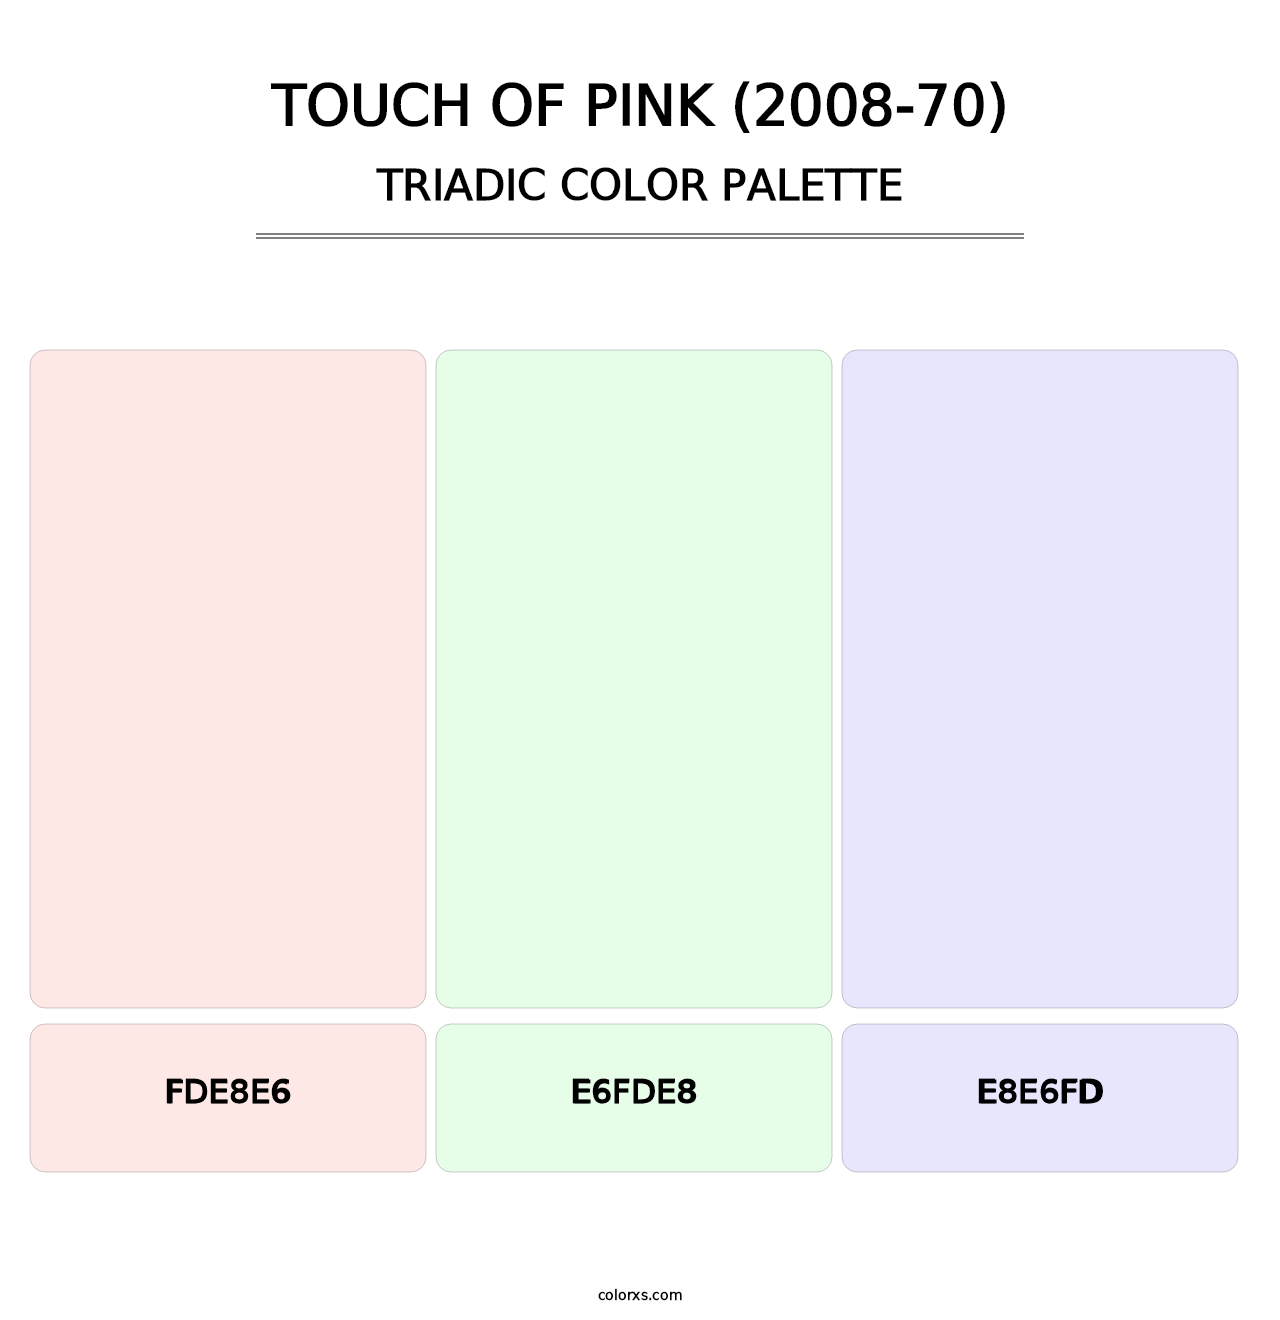 Touch of Pink (2008-70) - Triadic Color Palette